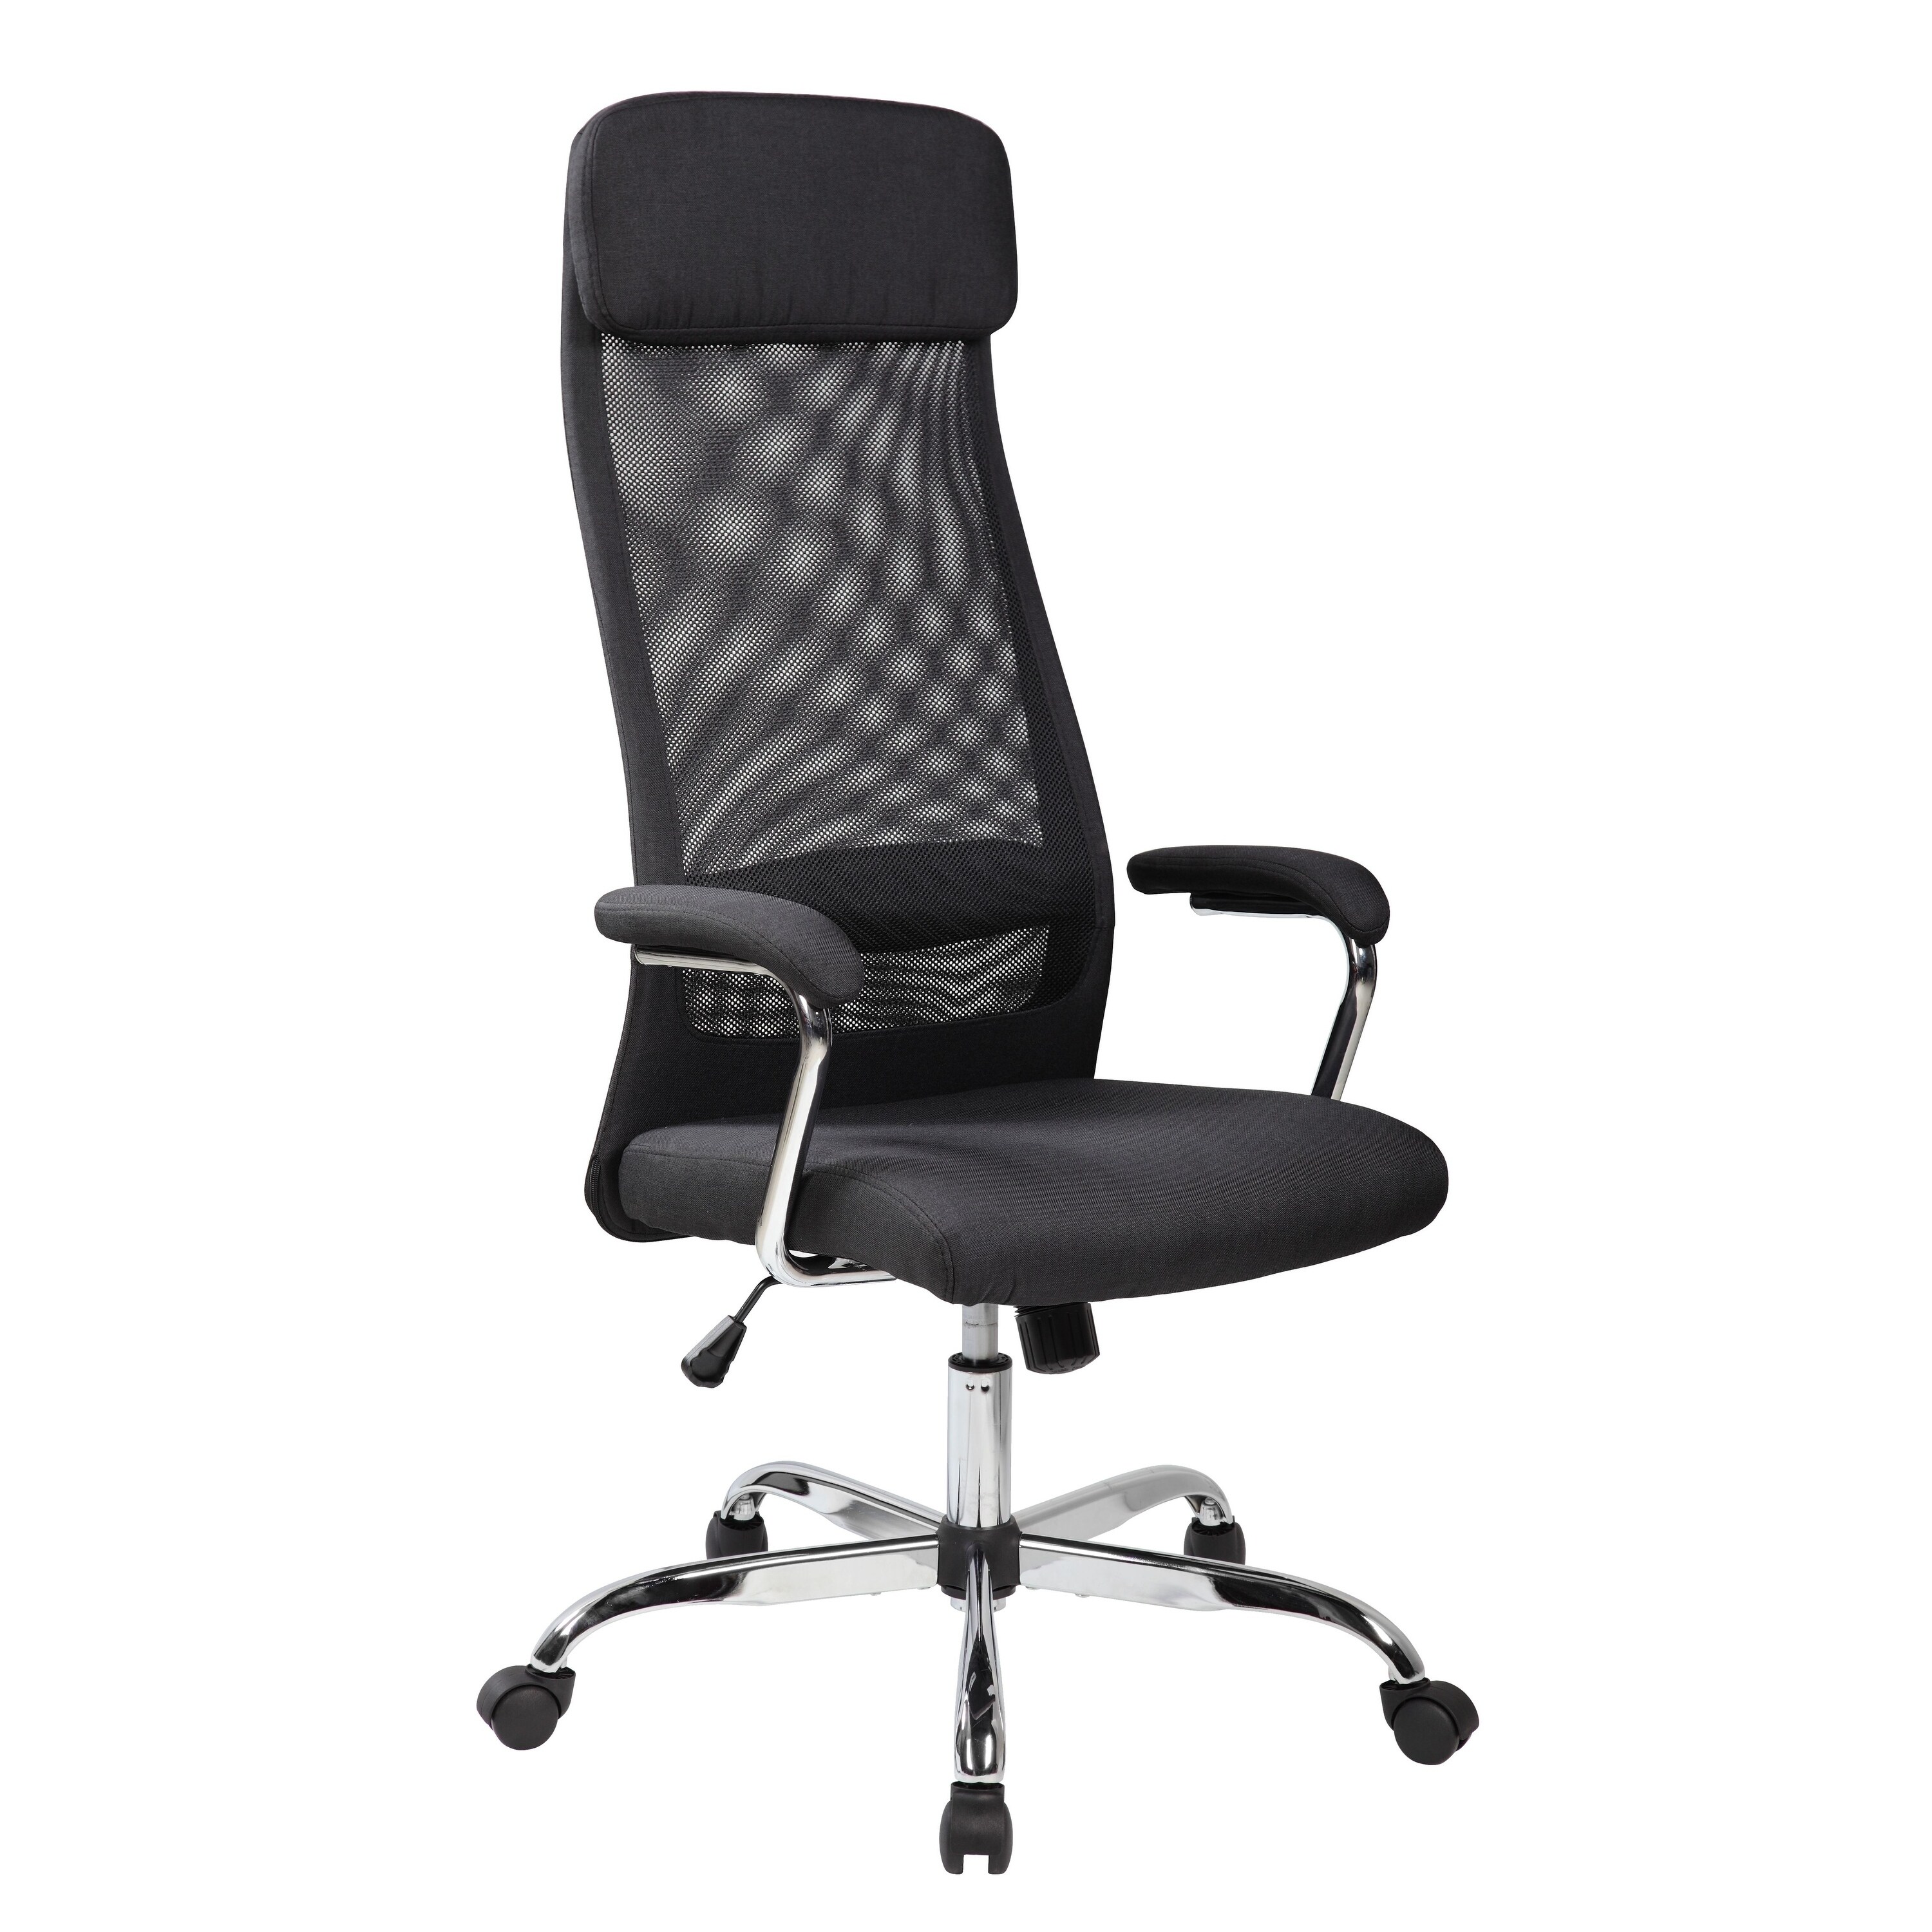 High Back Mesh Office Chair Executive Swivel Chair Padded Headrest Home Office